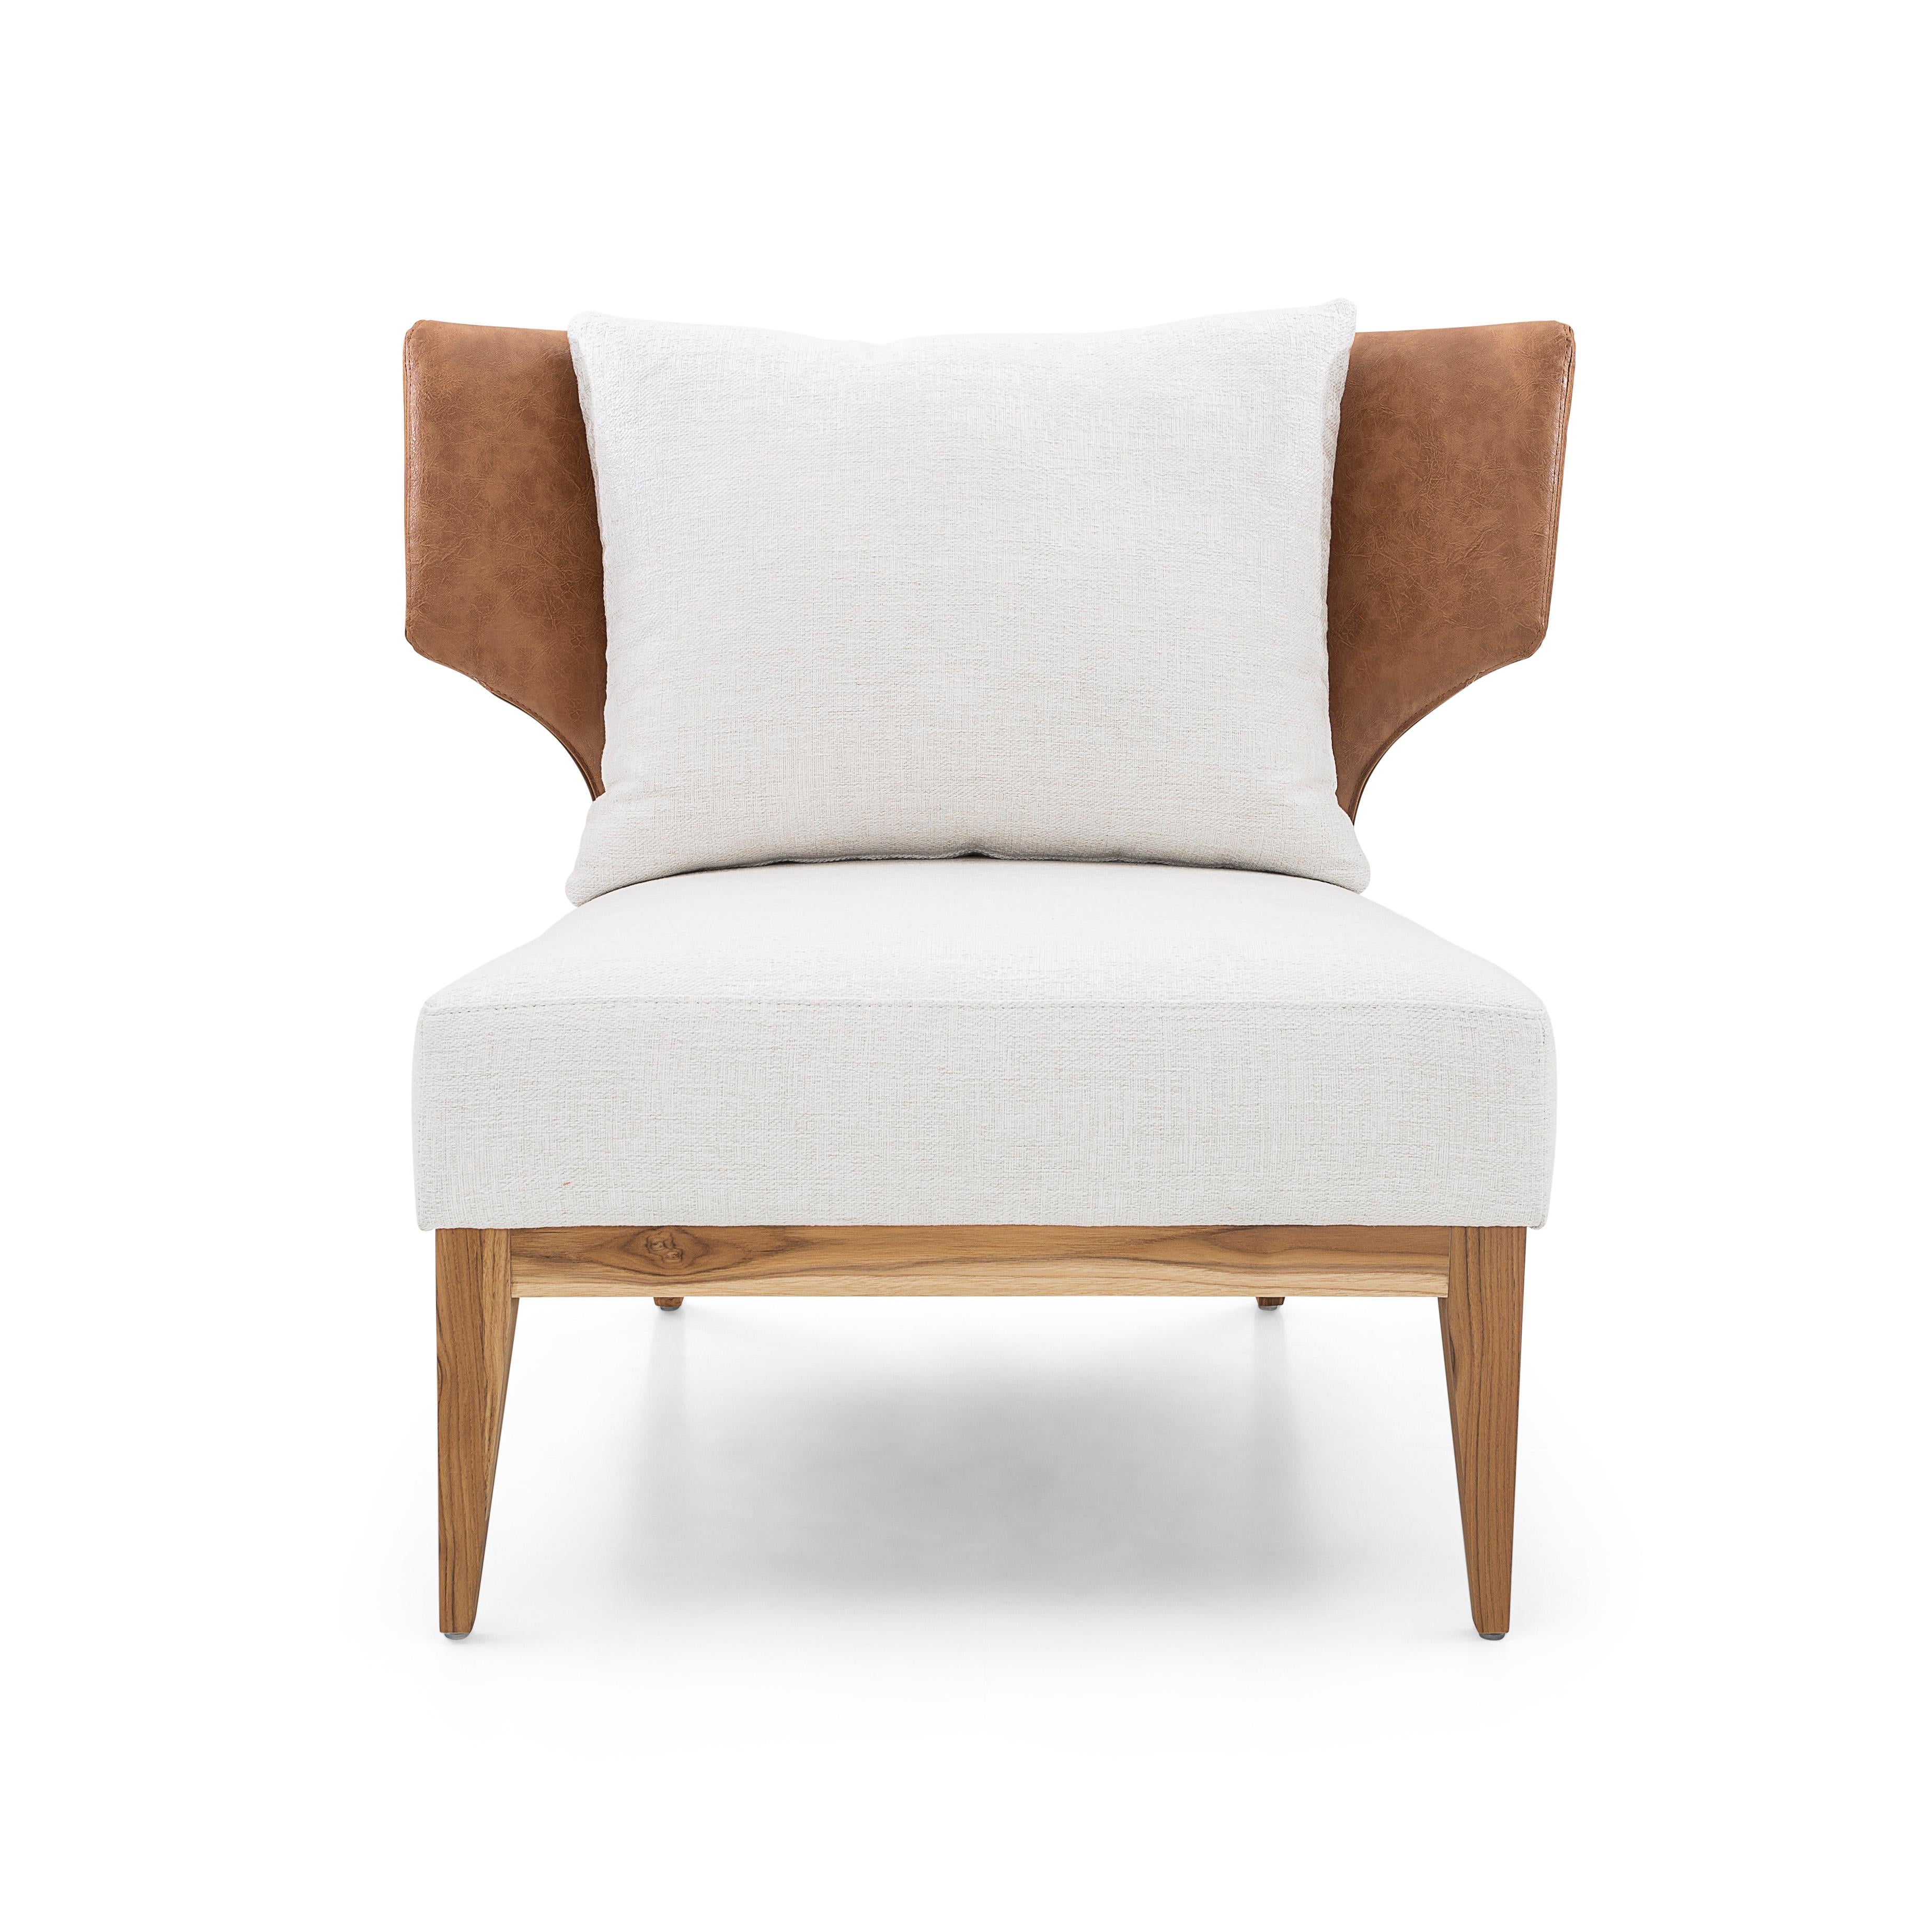 The Busto Curved Back Armchair is the perfect combination of a light brown faux leather on the outside and inside of the back, an off white beautiful and soft fabric seat and back pillow, and wood legs in a teak finish to match with this